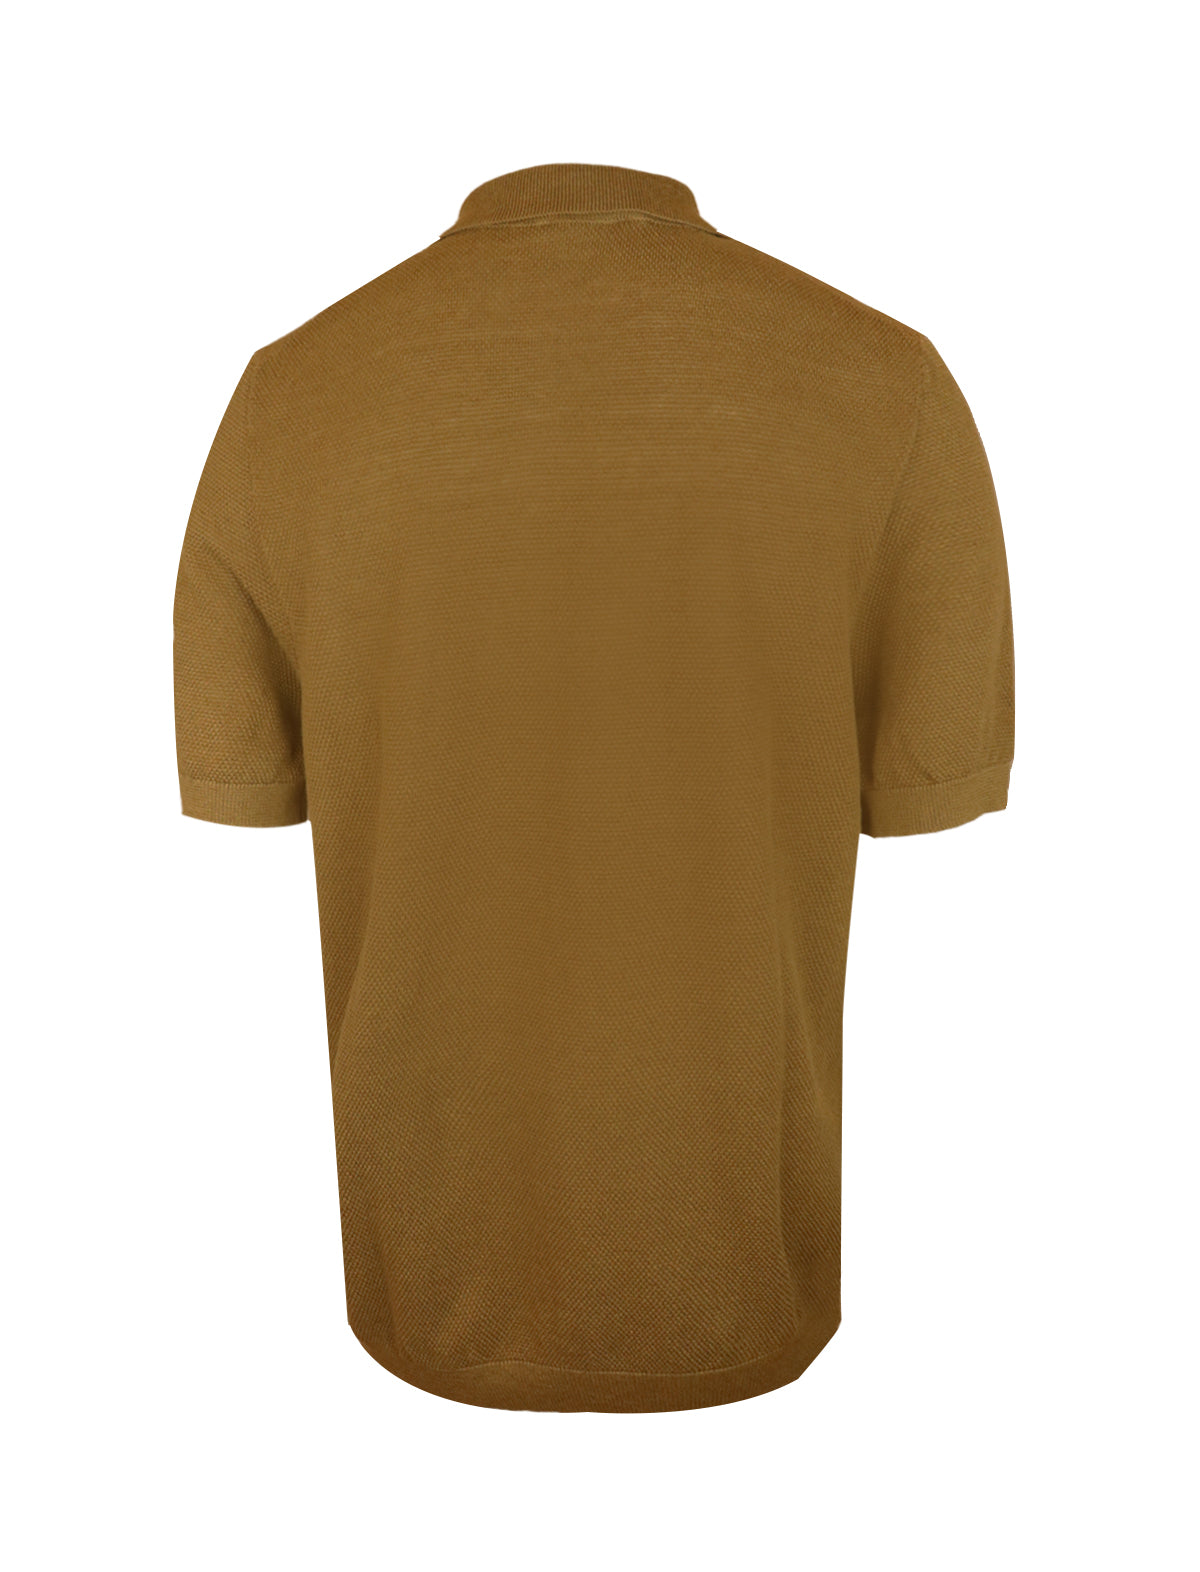 CIRCOLO 1901 Knitted Cotton-Linen Polo in Wood Brown